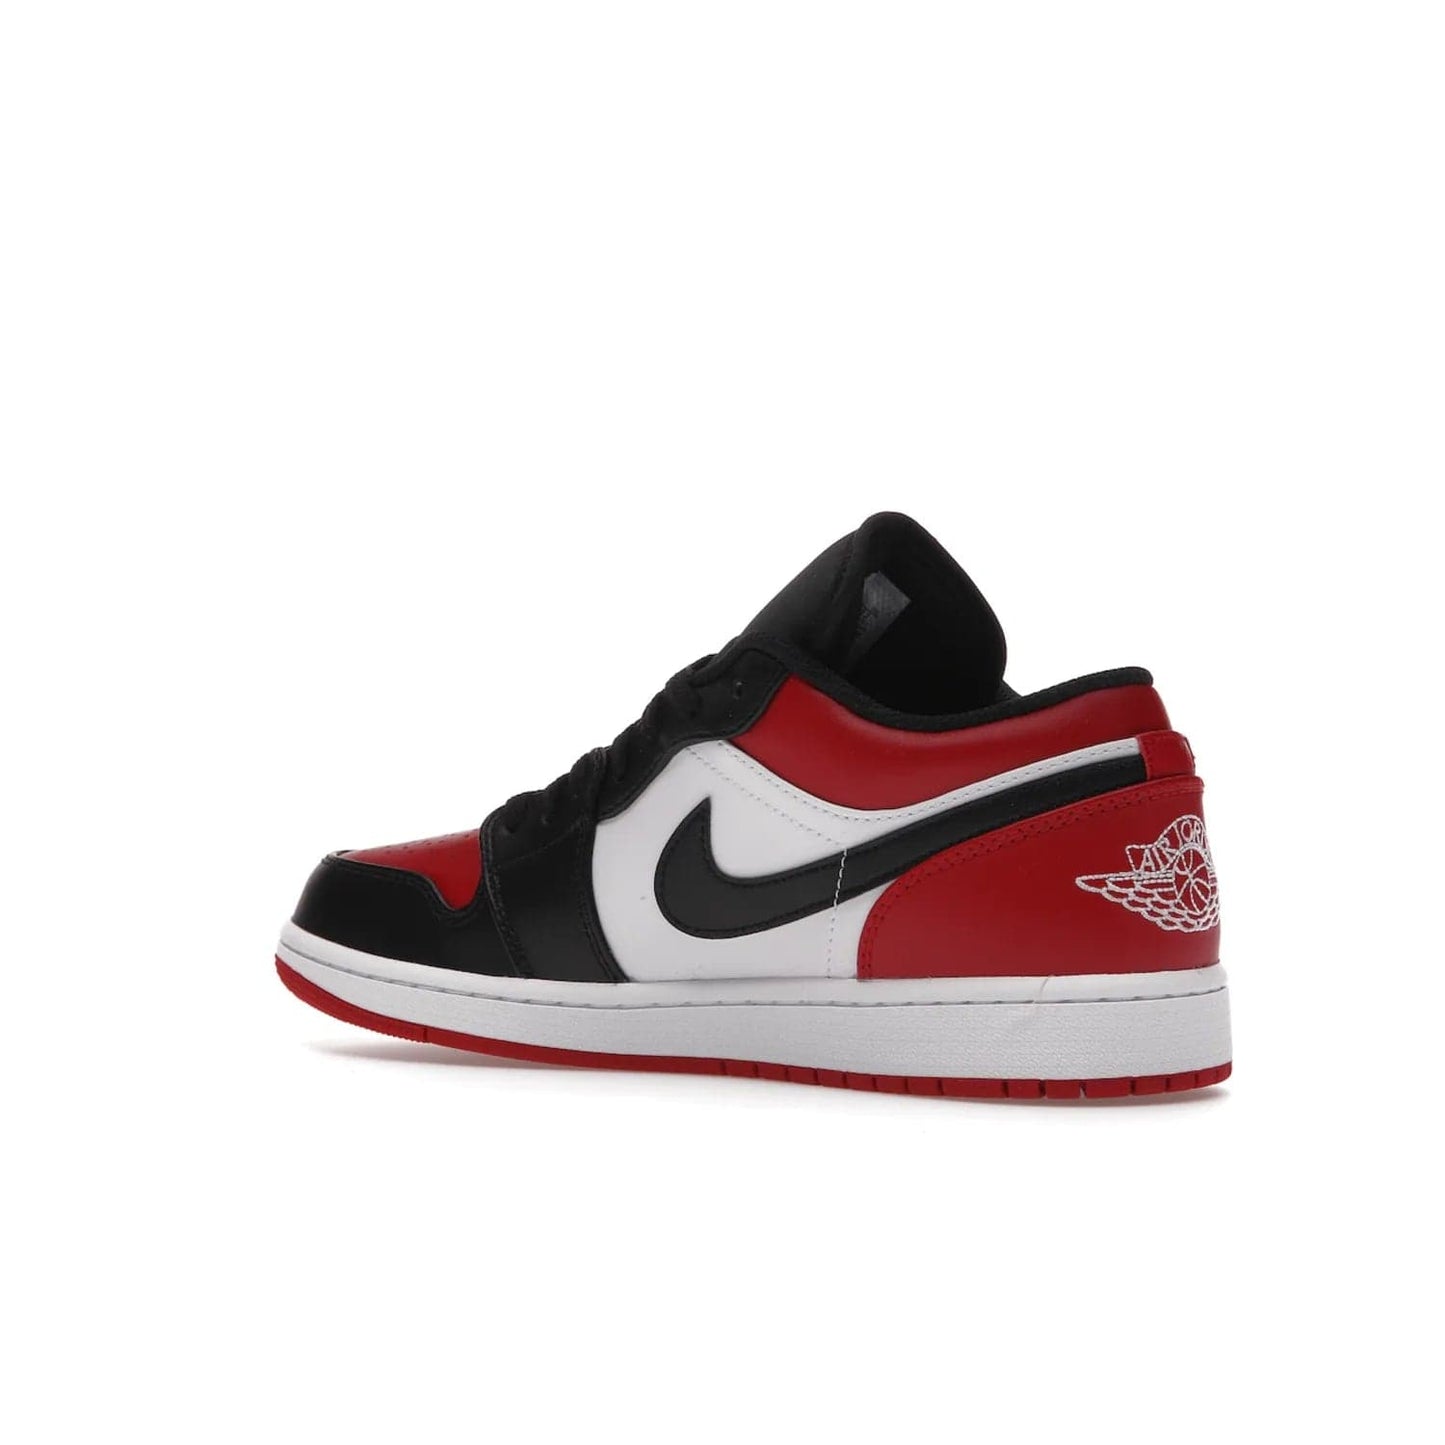 Jordan 1 Low Bred Toe - Image 23 - Only at www.BallersClubKickz.com - Step into the iconic Jordan 1 Retro. Mixing and matching of leather in red, black, and white makes for a unique colorway. Finished off with a Wing logo embroidery & Jumpman label. Comfortable and stylish at an affordable $100, the Jordan 1 Low Bred Toe is perfect for any true sneaker fan.